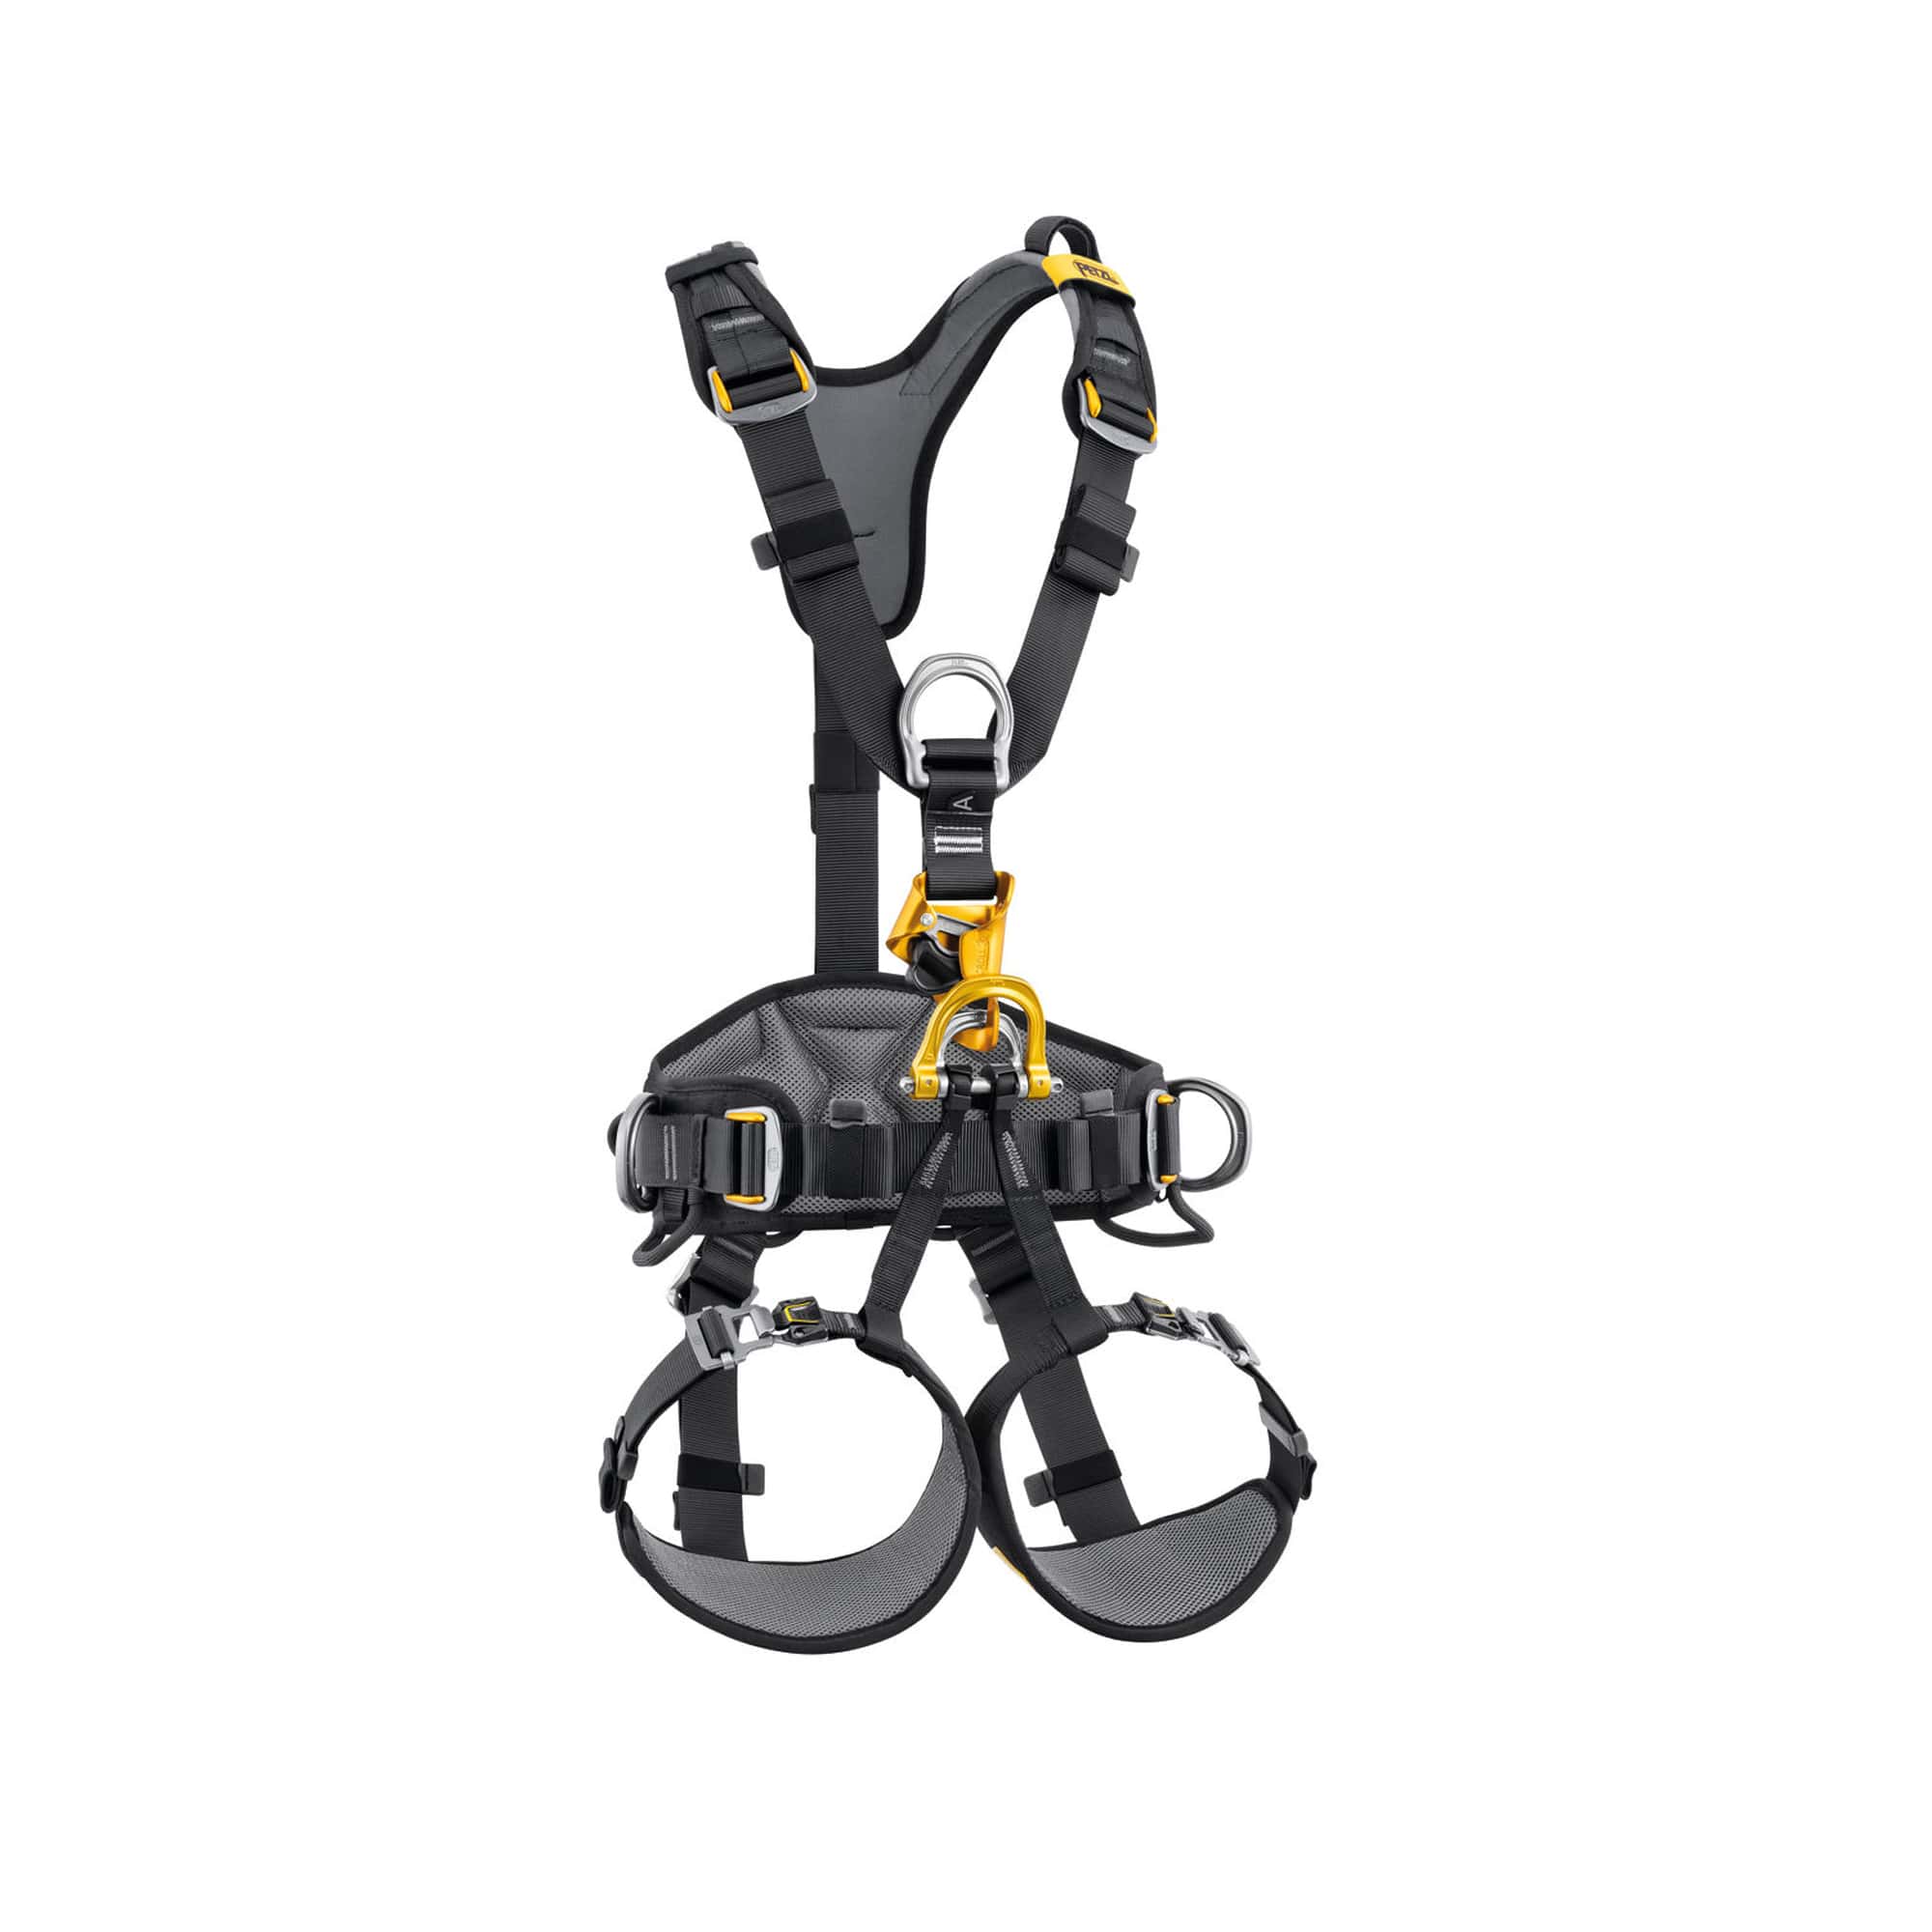 Rope access harness Astro Bod Fast Petzl